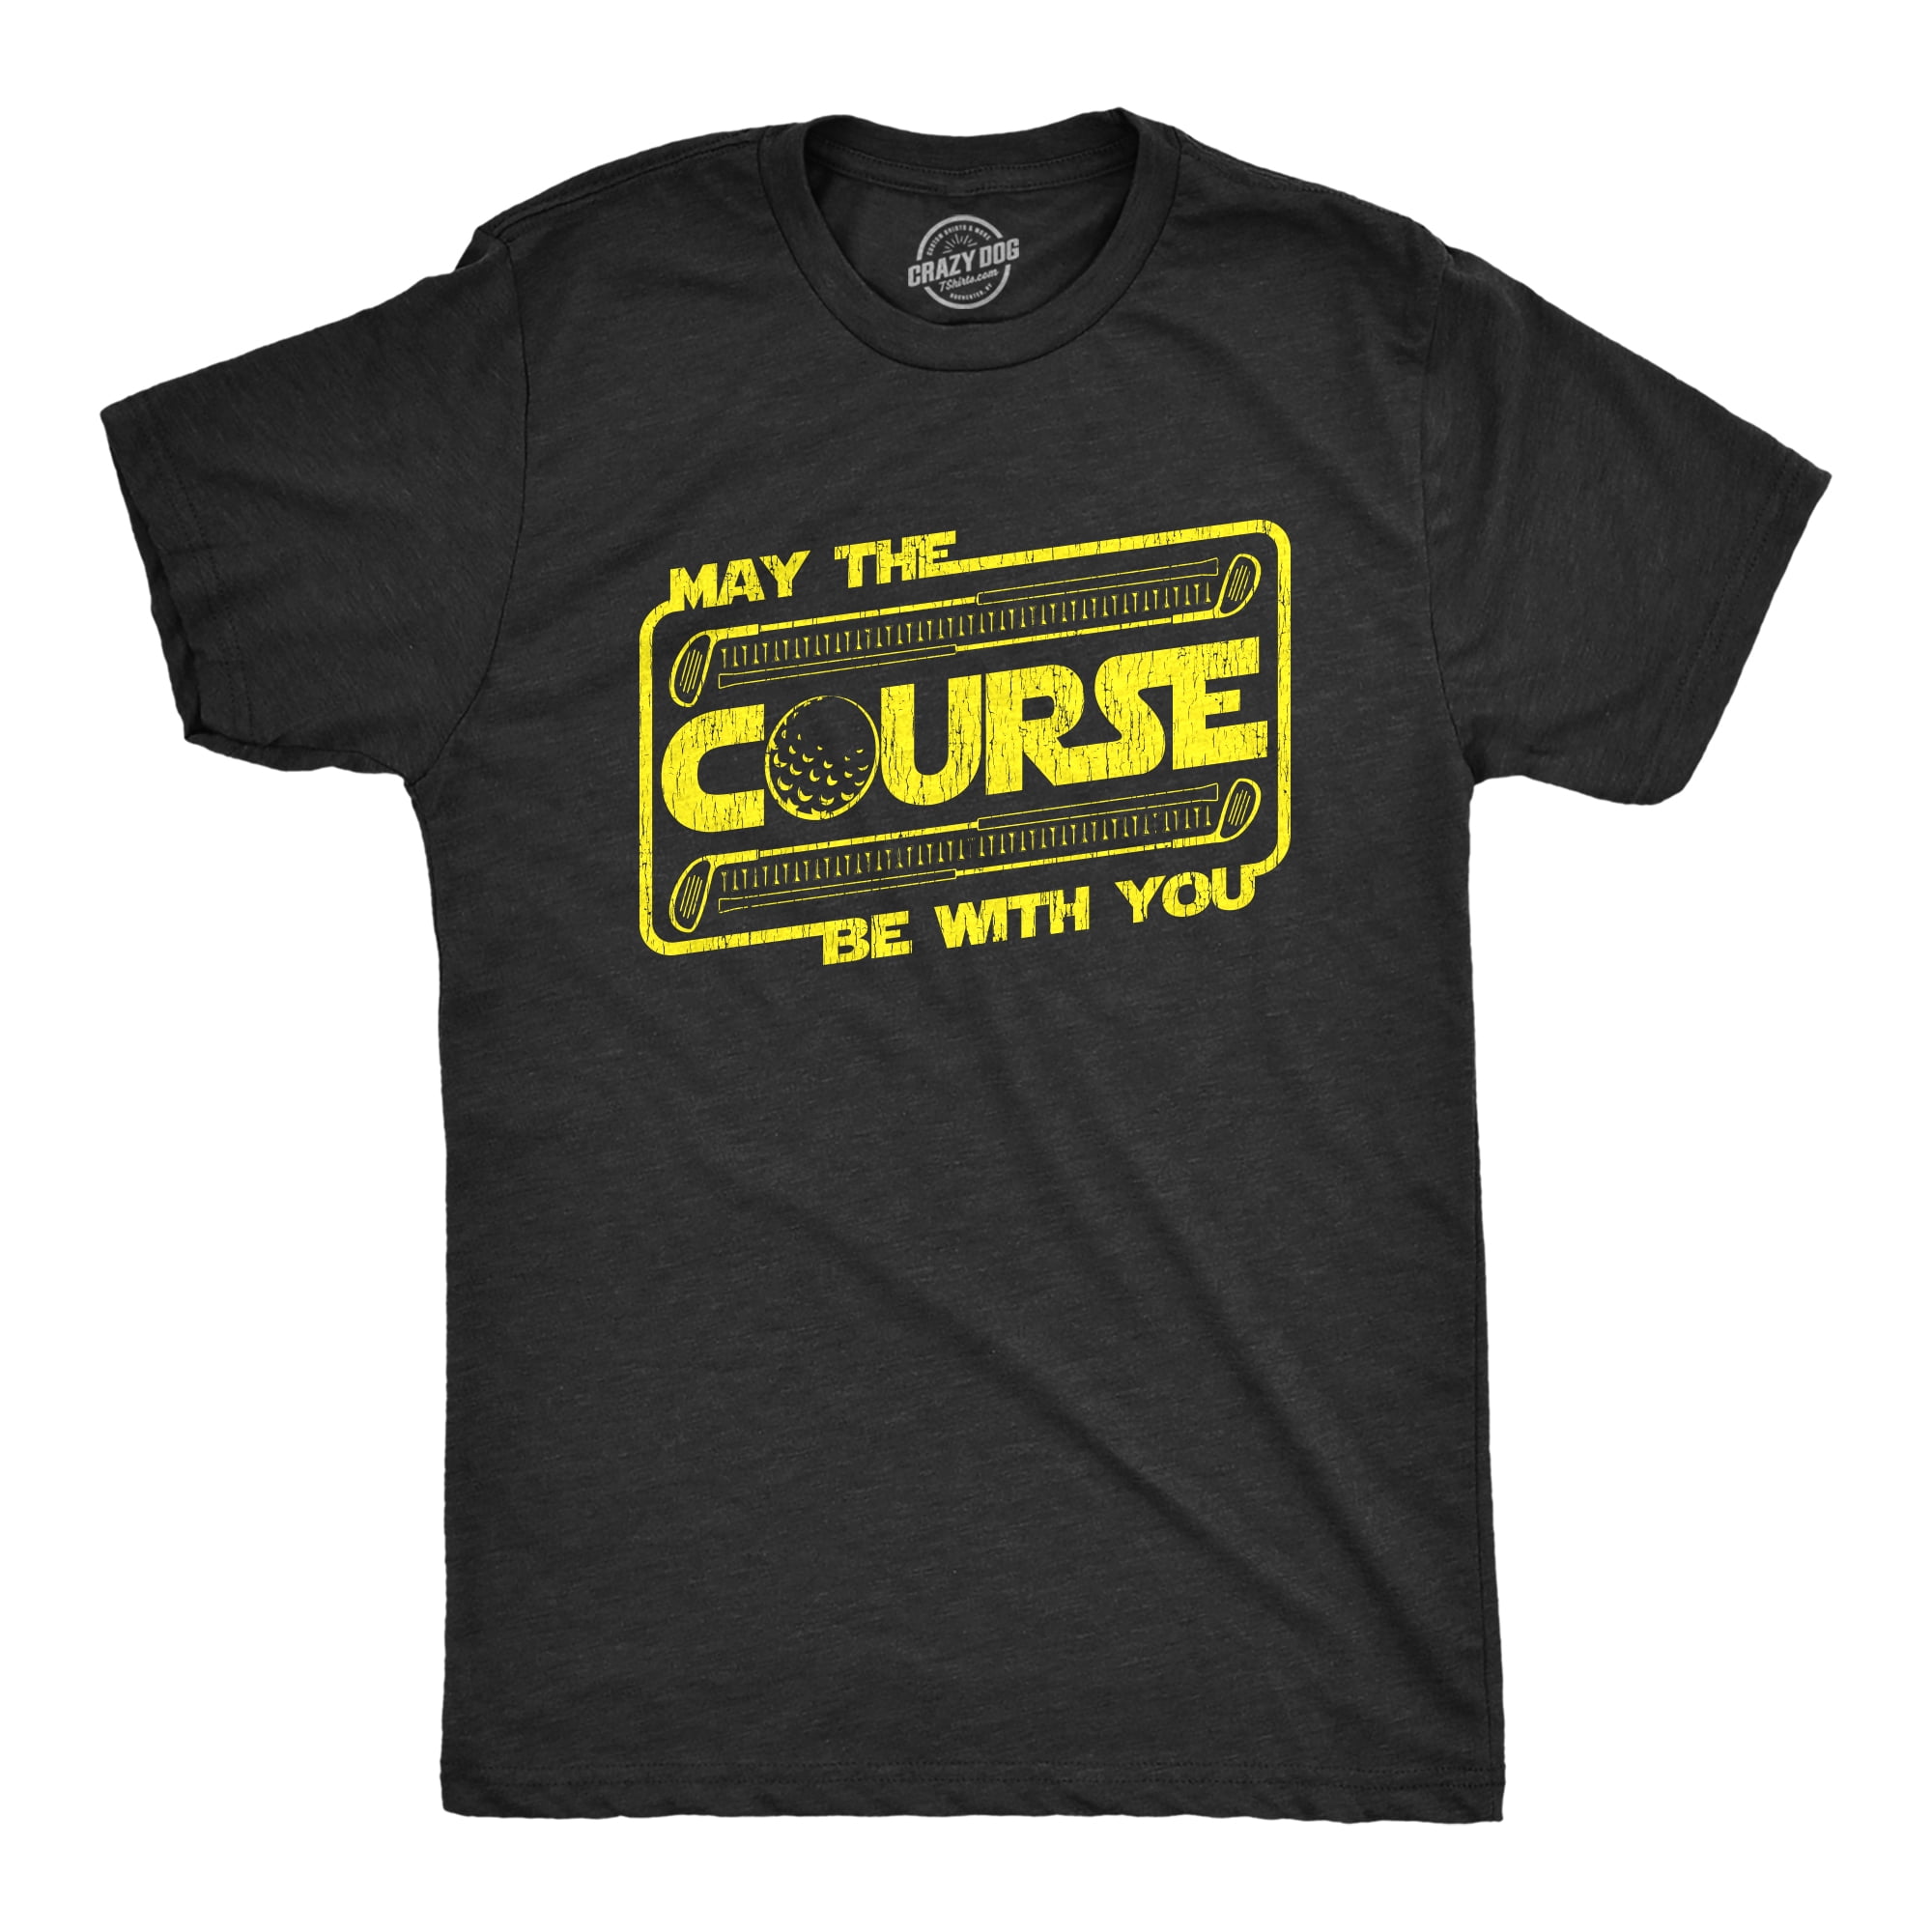 Mens May The Course Be With You T Shirt Funny Star Galaxy Force Golfing ...